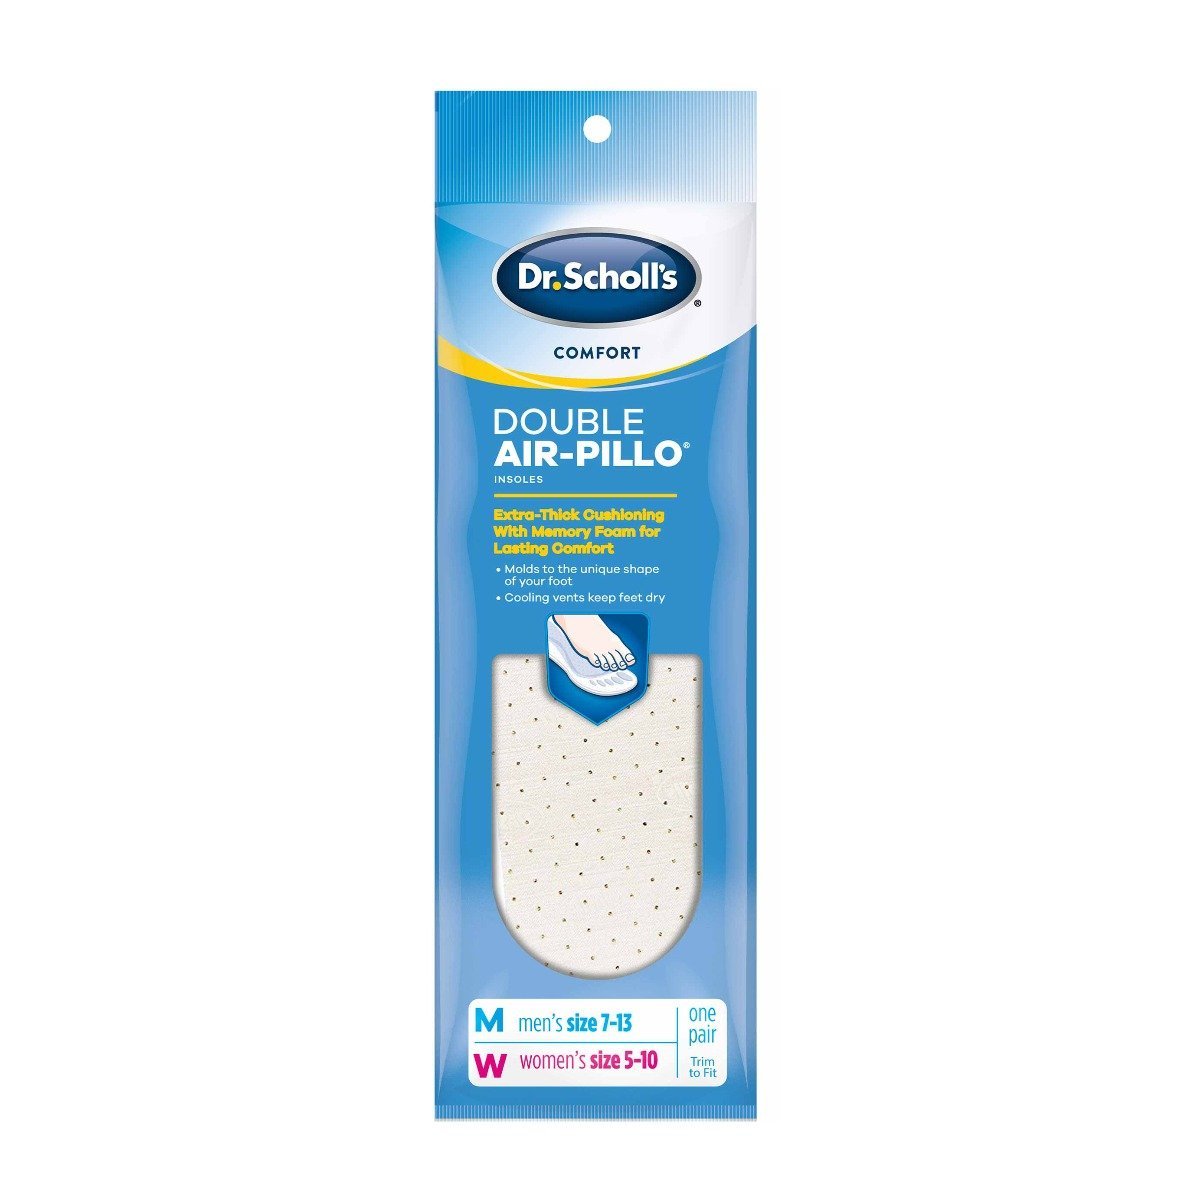 Dr. Scholl’s Comfort Double-Air Pillo Insoles Cushioning Men Size (7-13) & Women Size (5-10) - 1 Pair - Bloom Pharmacy